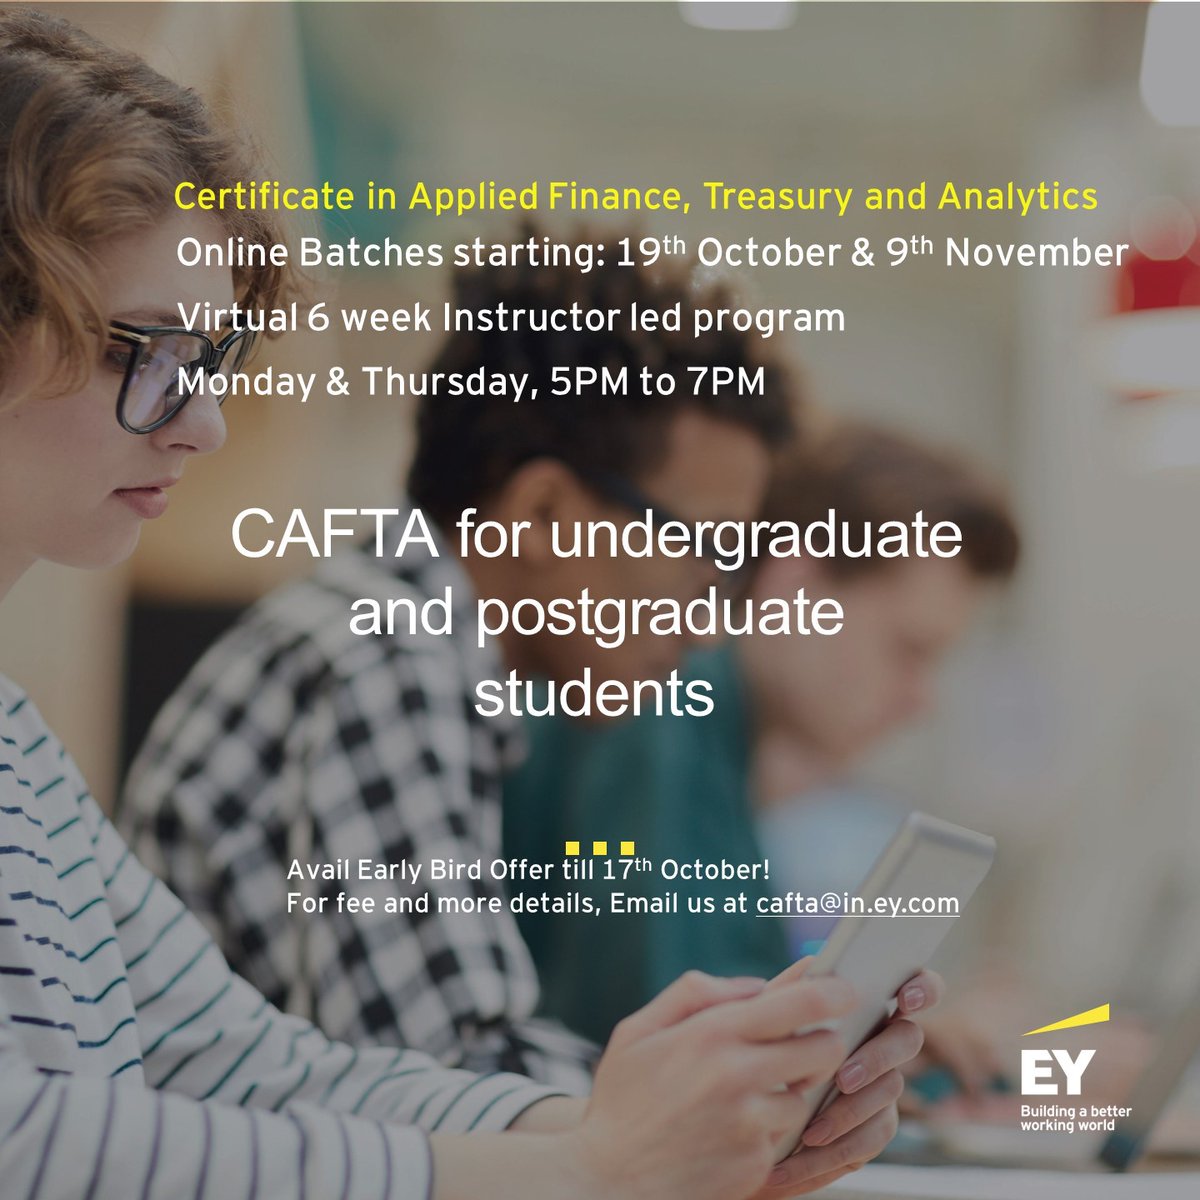 Ever heard of an upskill program that offers practical industry insights from subject matter experts, internship opportunities, networking opportunities, mentoring and much more altogether! If not, then check out EY's CAFTA!
#EY #EYCAFTA #finance #treasury #corporatefinance